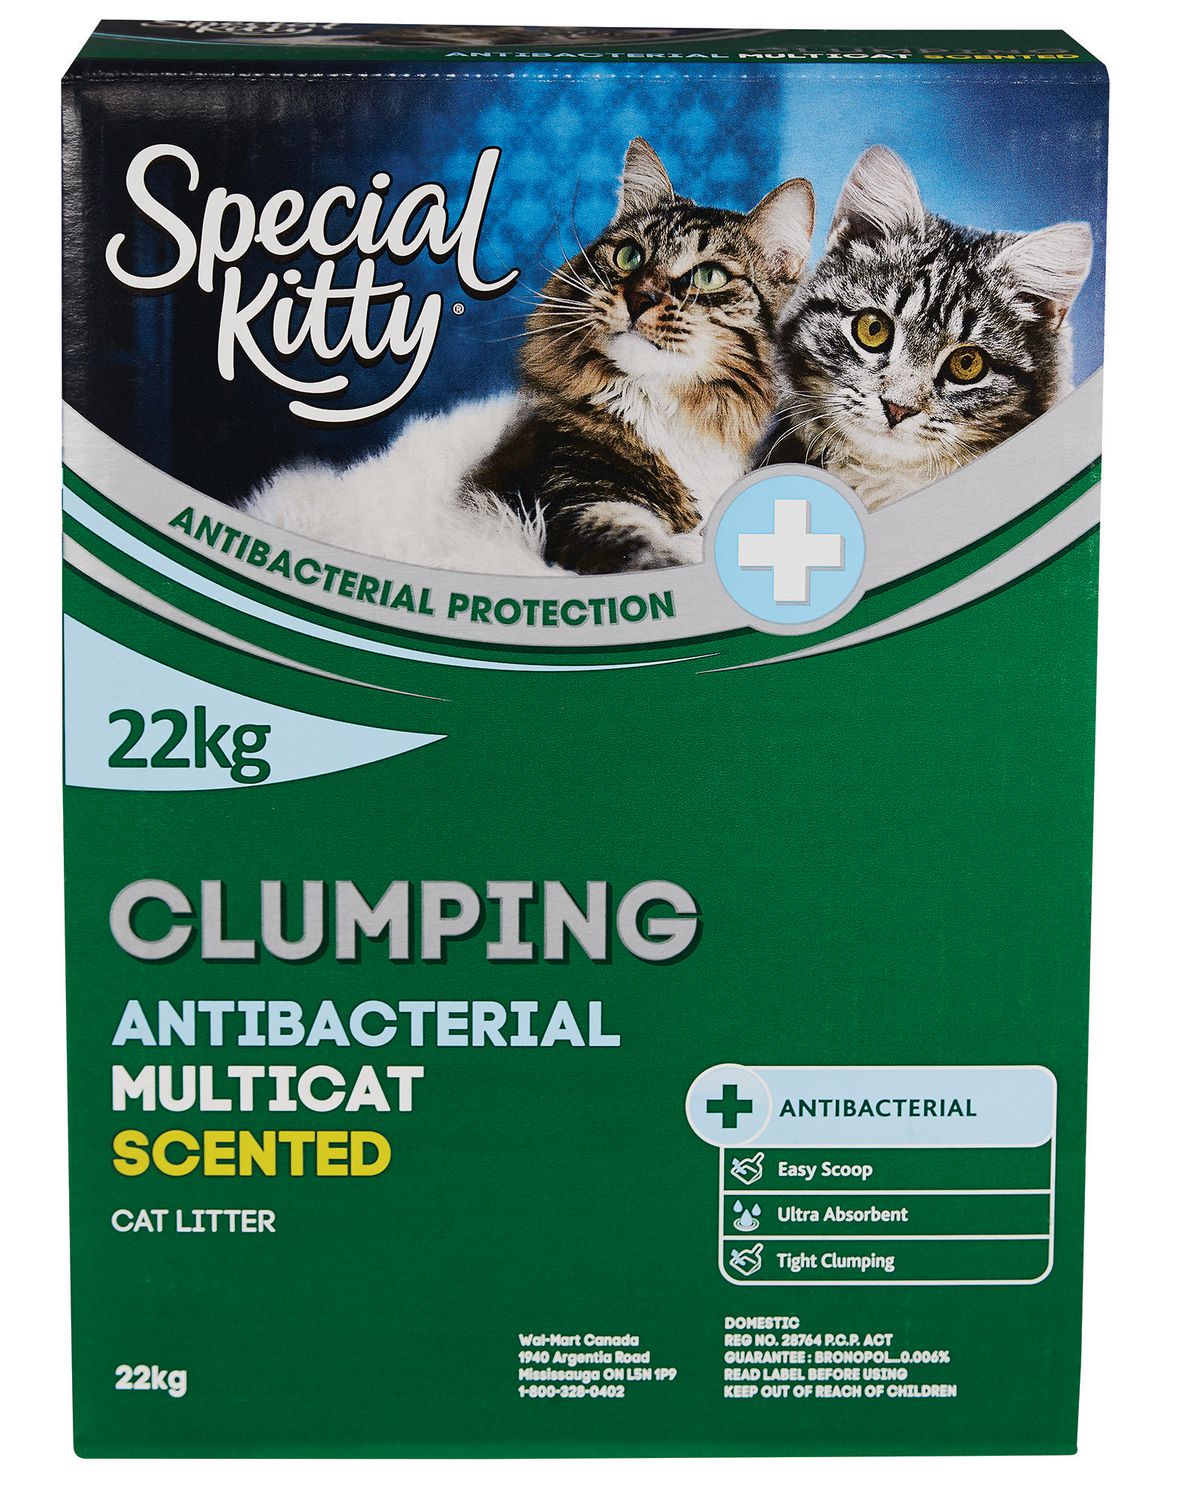 Special Kitty Clumping Antibacterial MultiCat Litter Scented